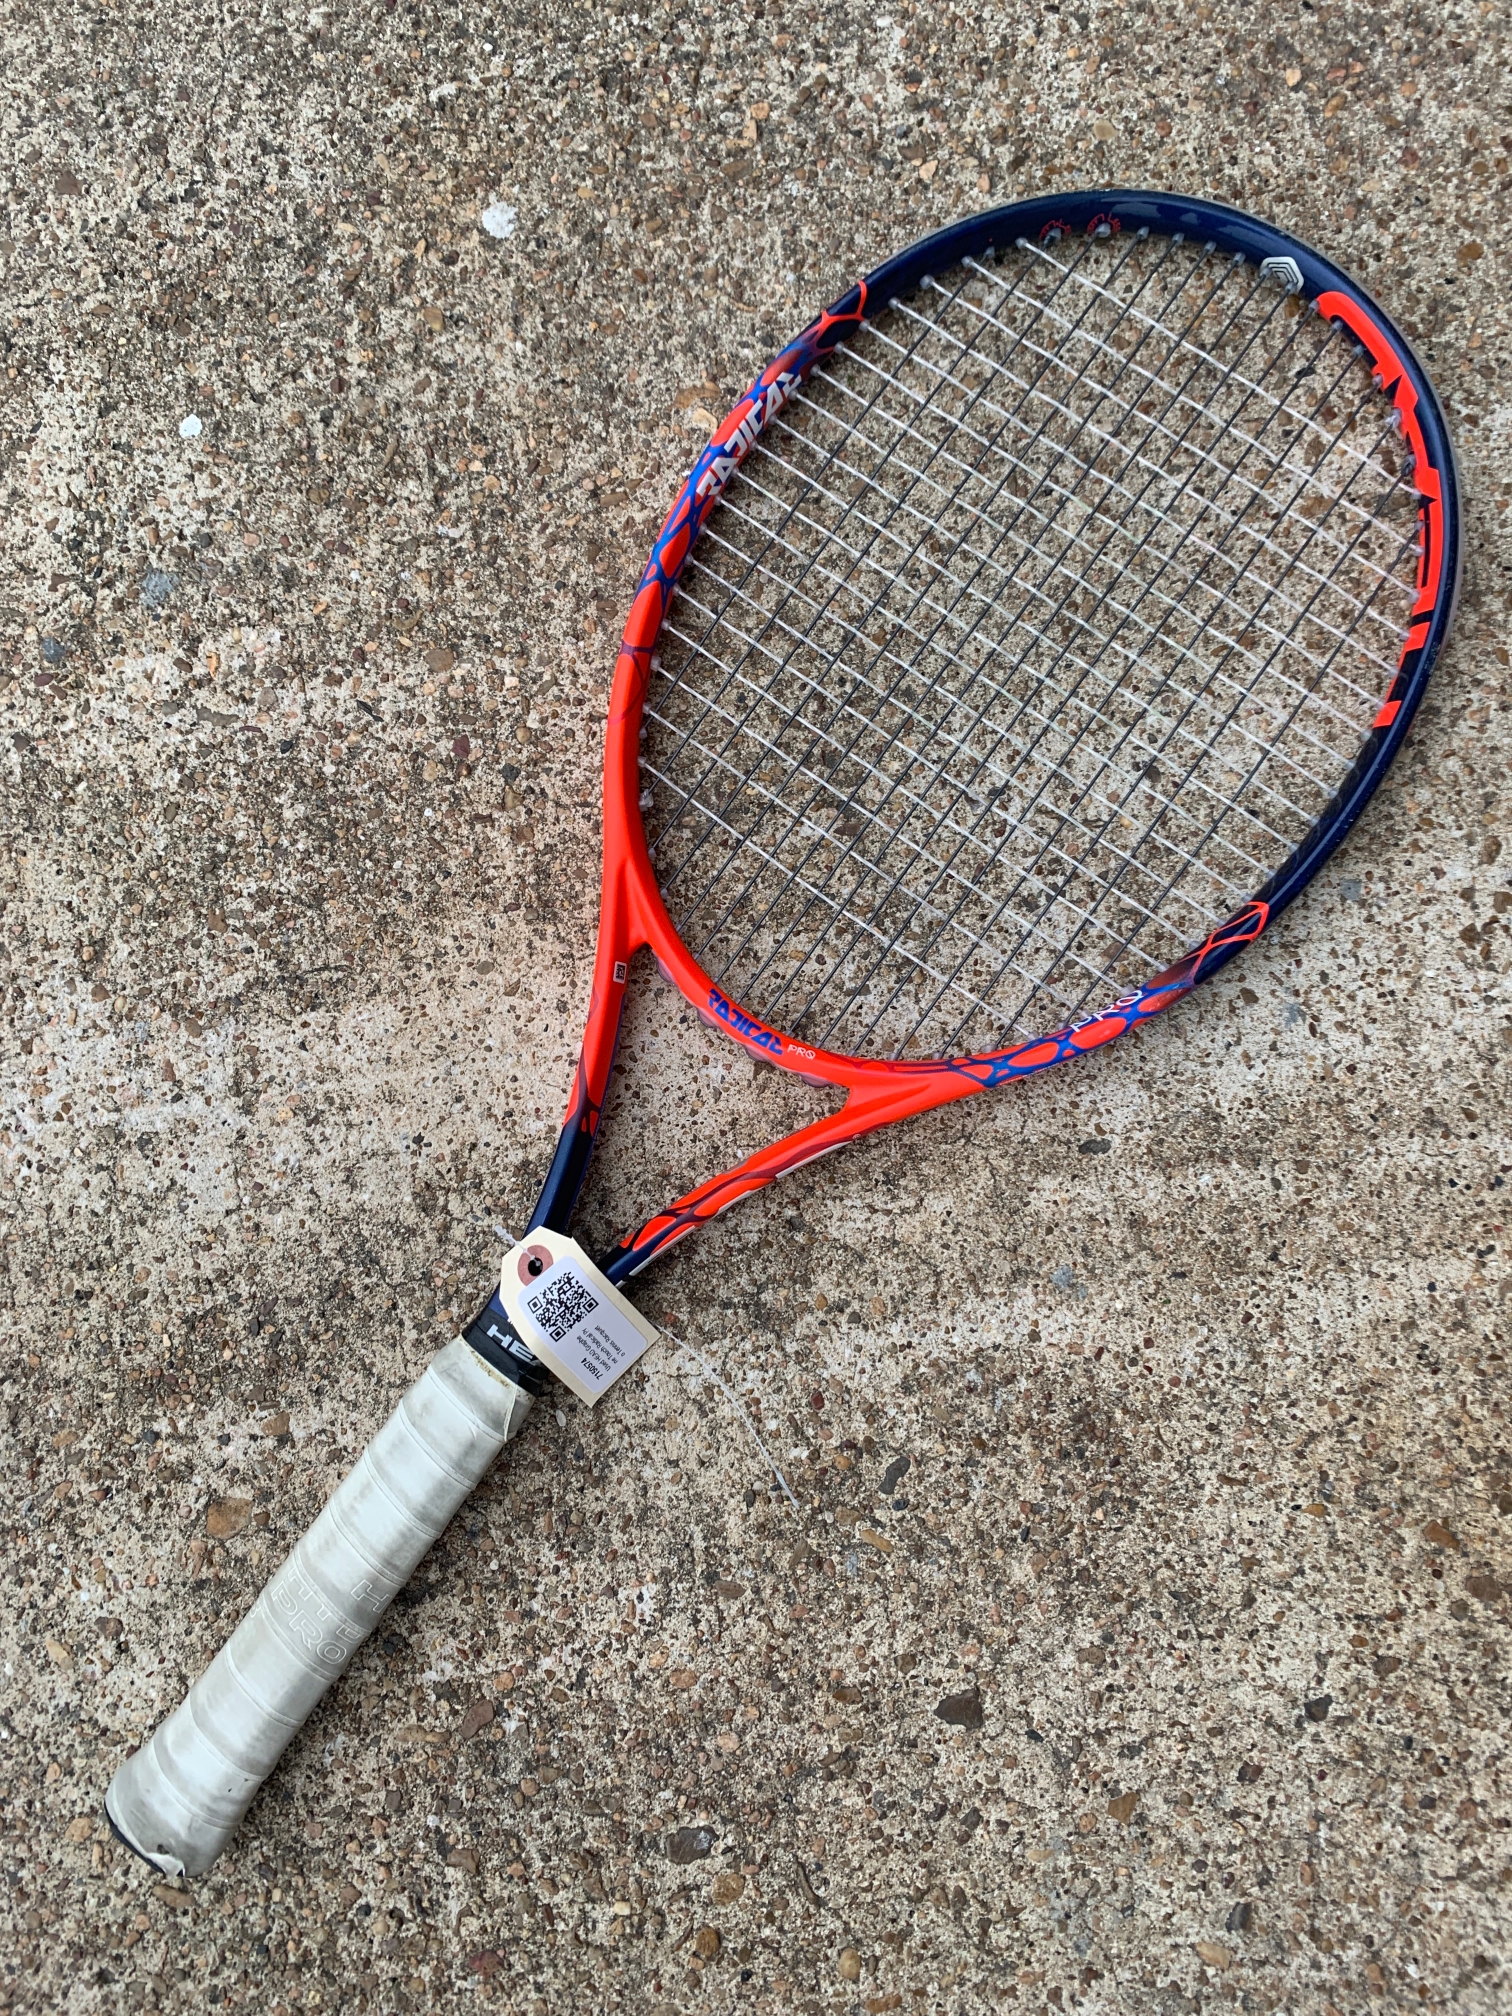 Used HEAD Graphene Touch Radical Pro Tennis Racquet